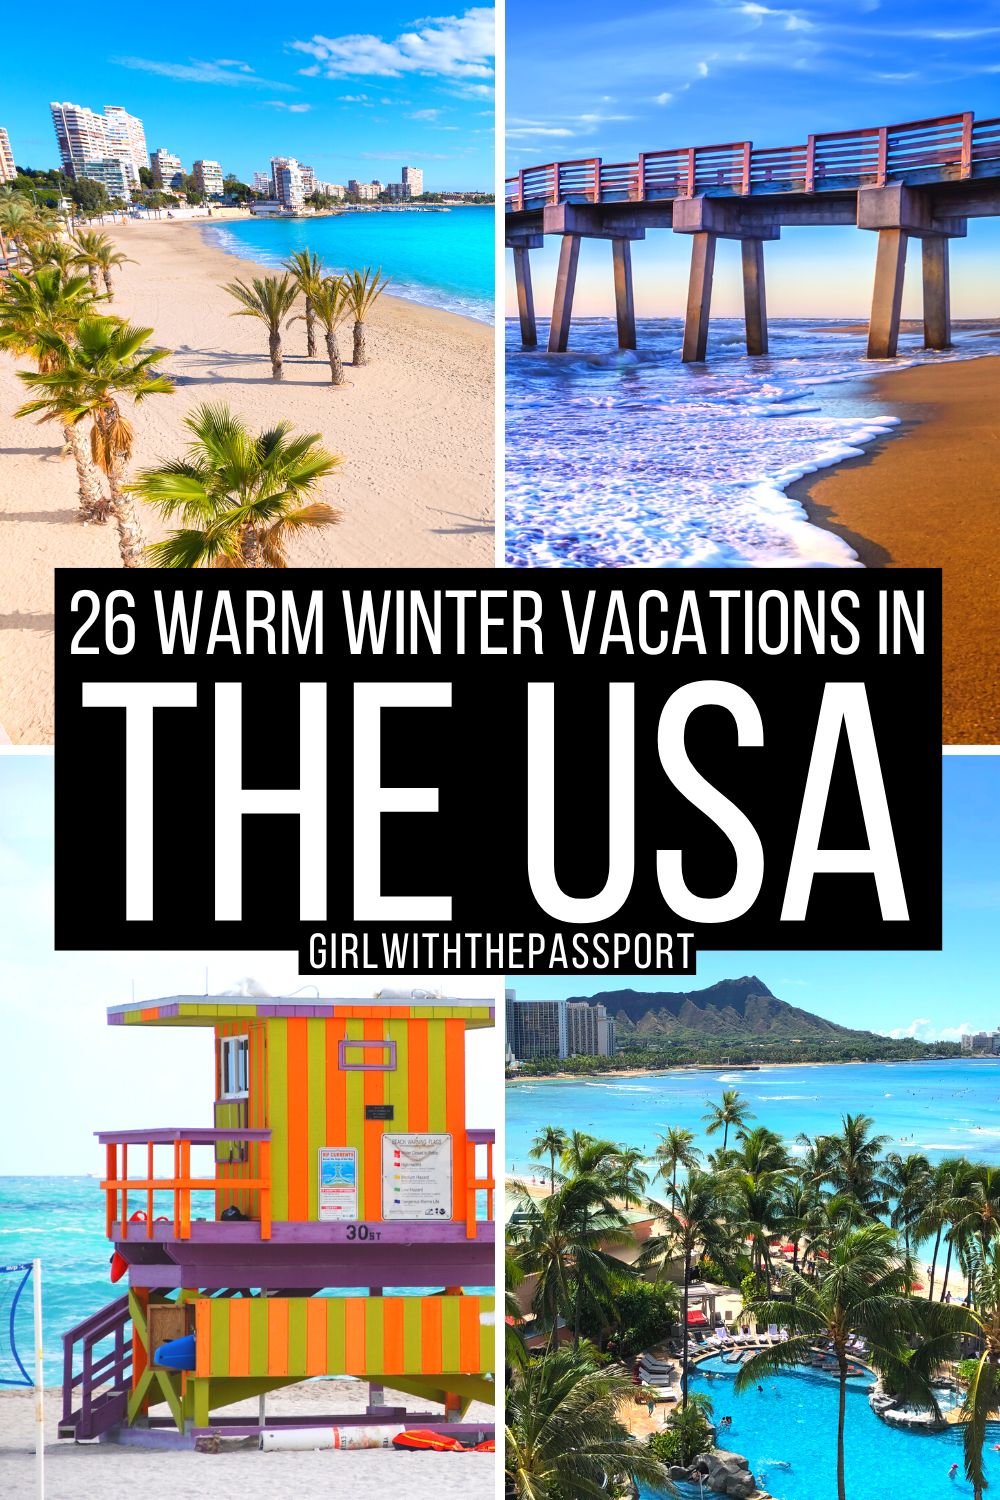 26 Amazing Warm Winter Vacations in the USA